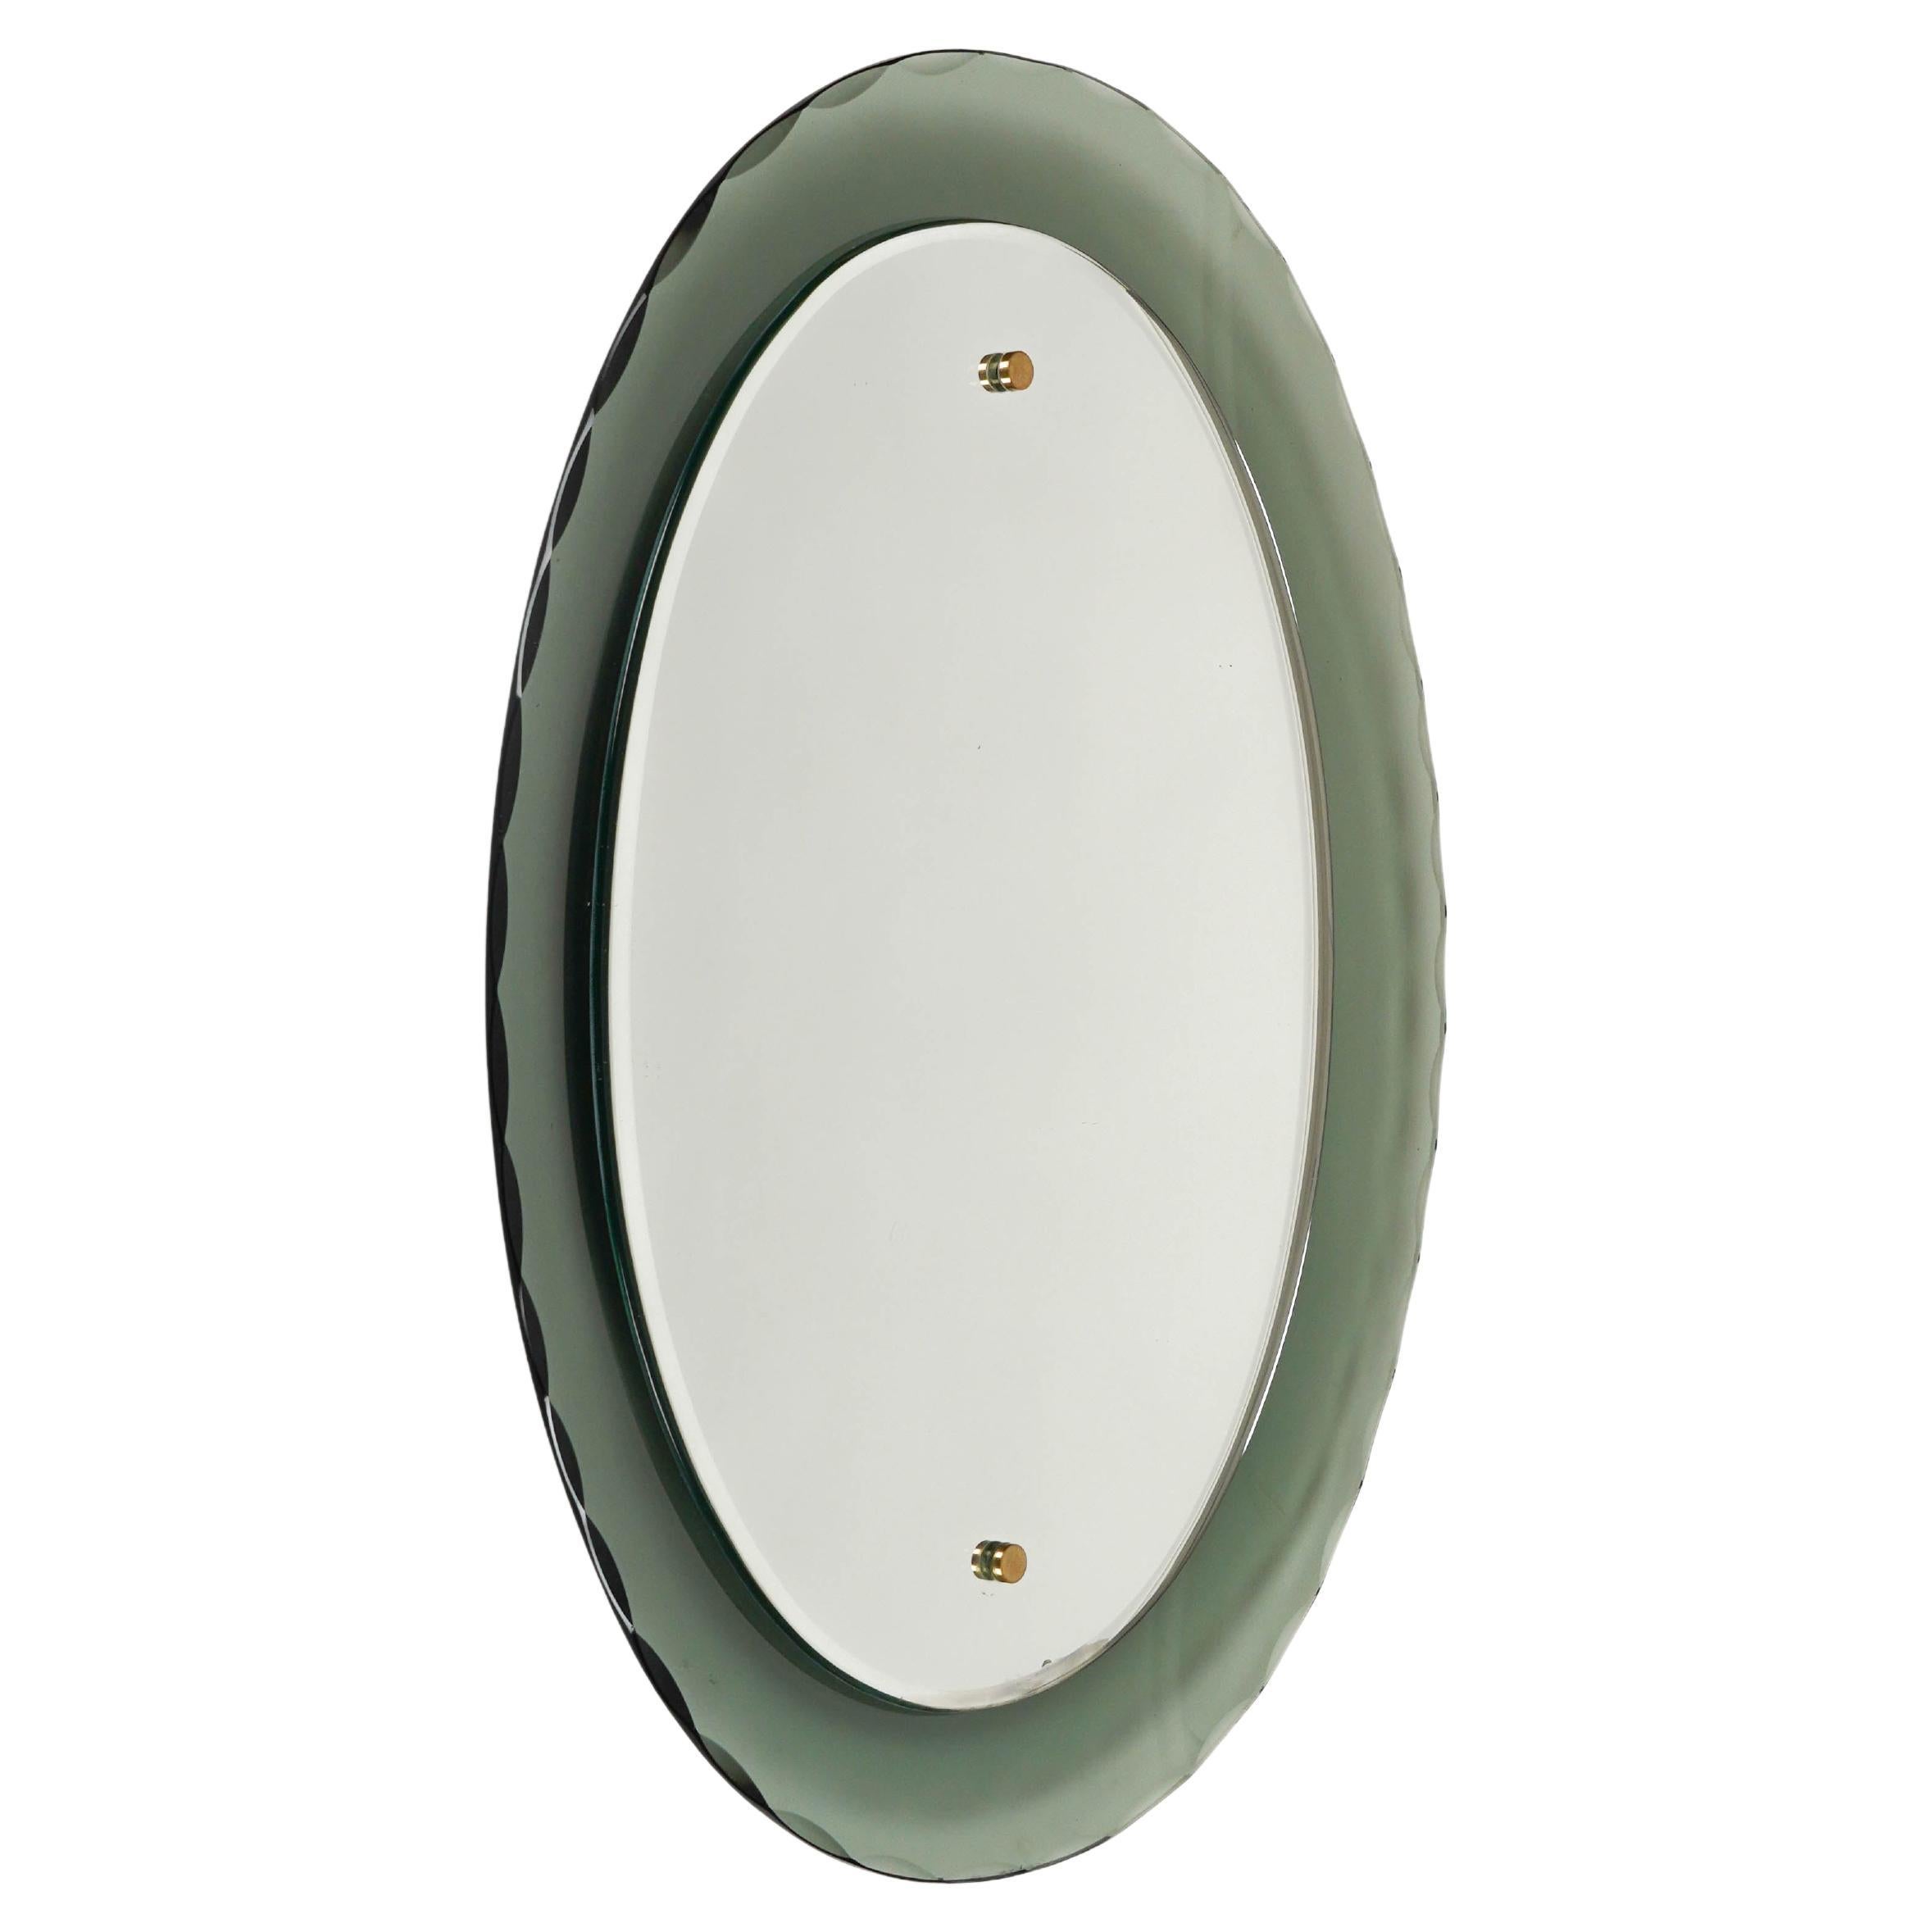 Midcentury Oval Wall Mirror whit Smoked Glass Frame by Cristal Arte, Italy 1960s